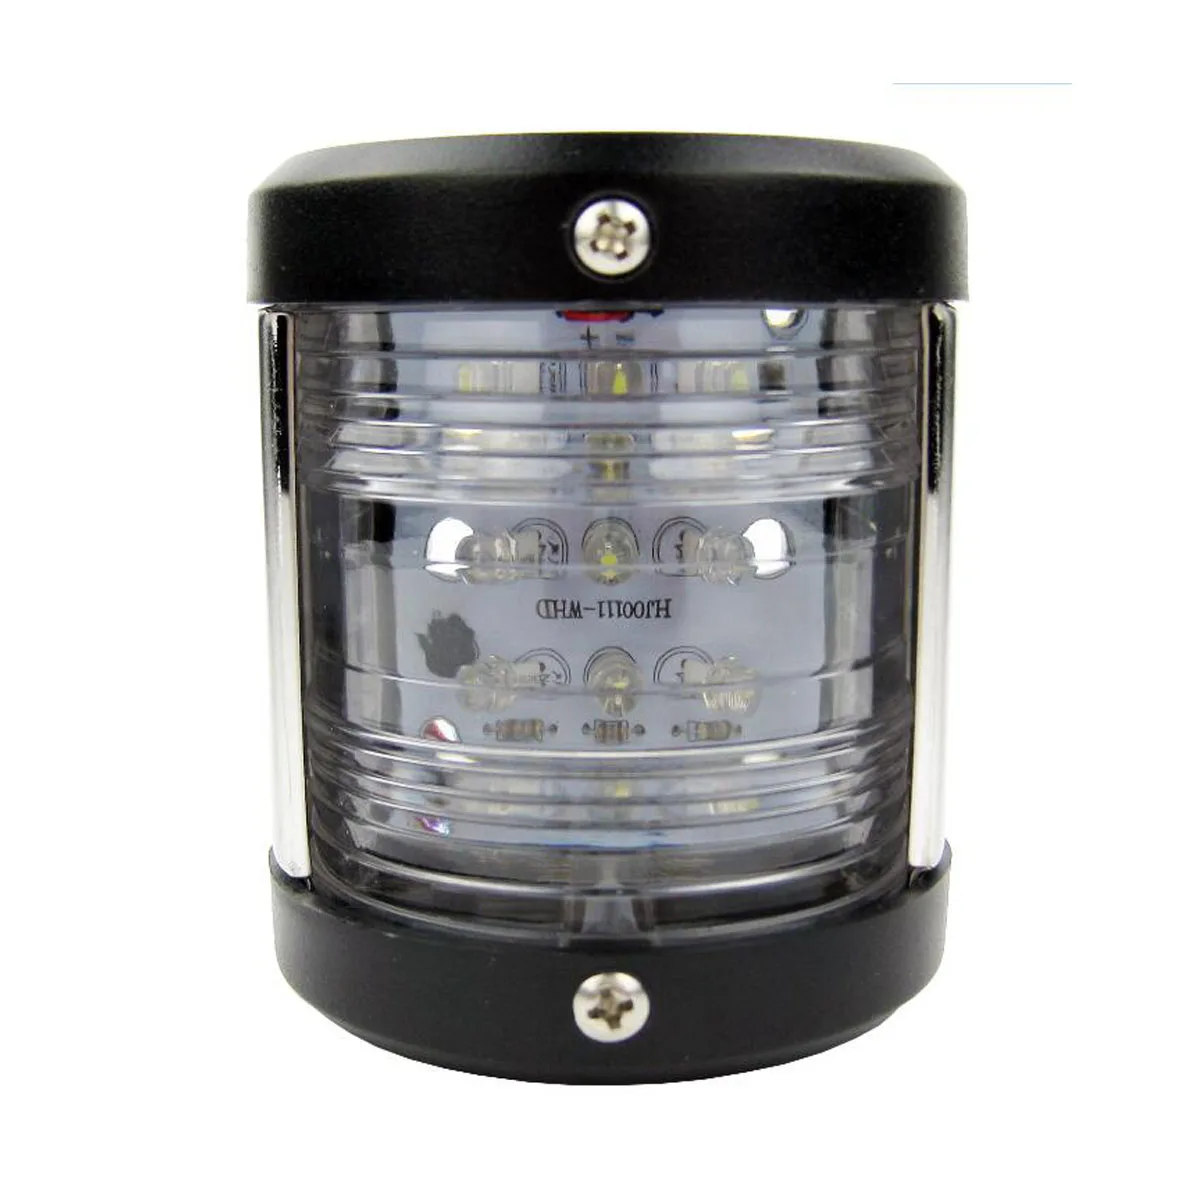 Boat Black Plastic 12V LED/Tungsten Low Side Lamp 225 Degree Waterproof Masthead and Stern Navigation White Light outdoor solar wall lamp 1200ma ipx65 waterproof tungsten wire lighting induction courtyard light garden villa night light